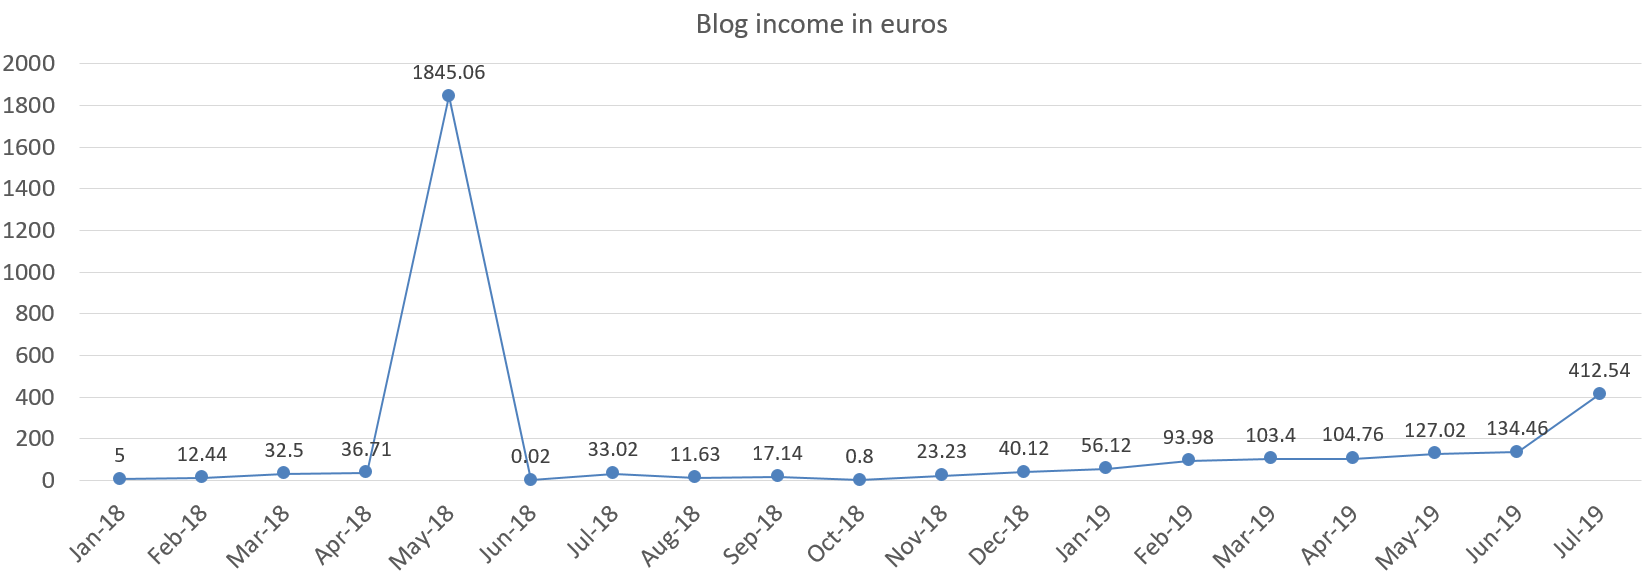 Blog income in euros july 2019